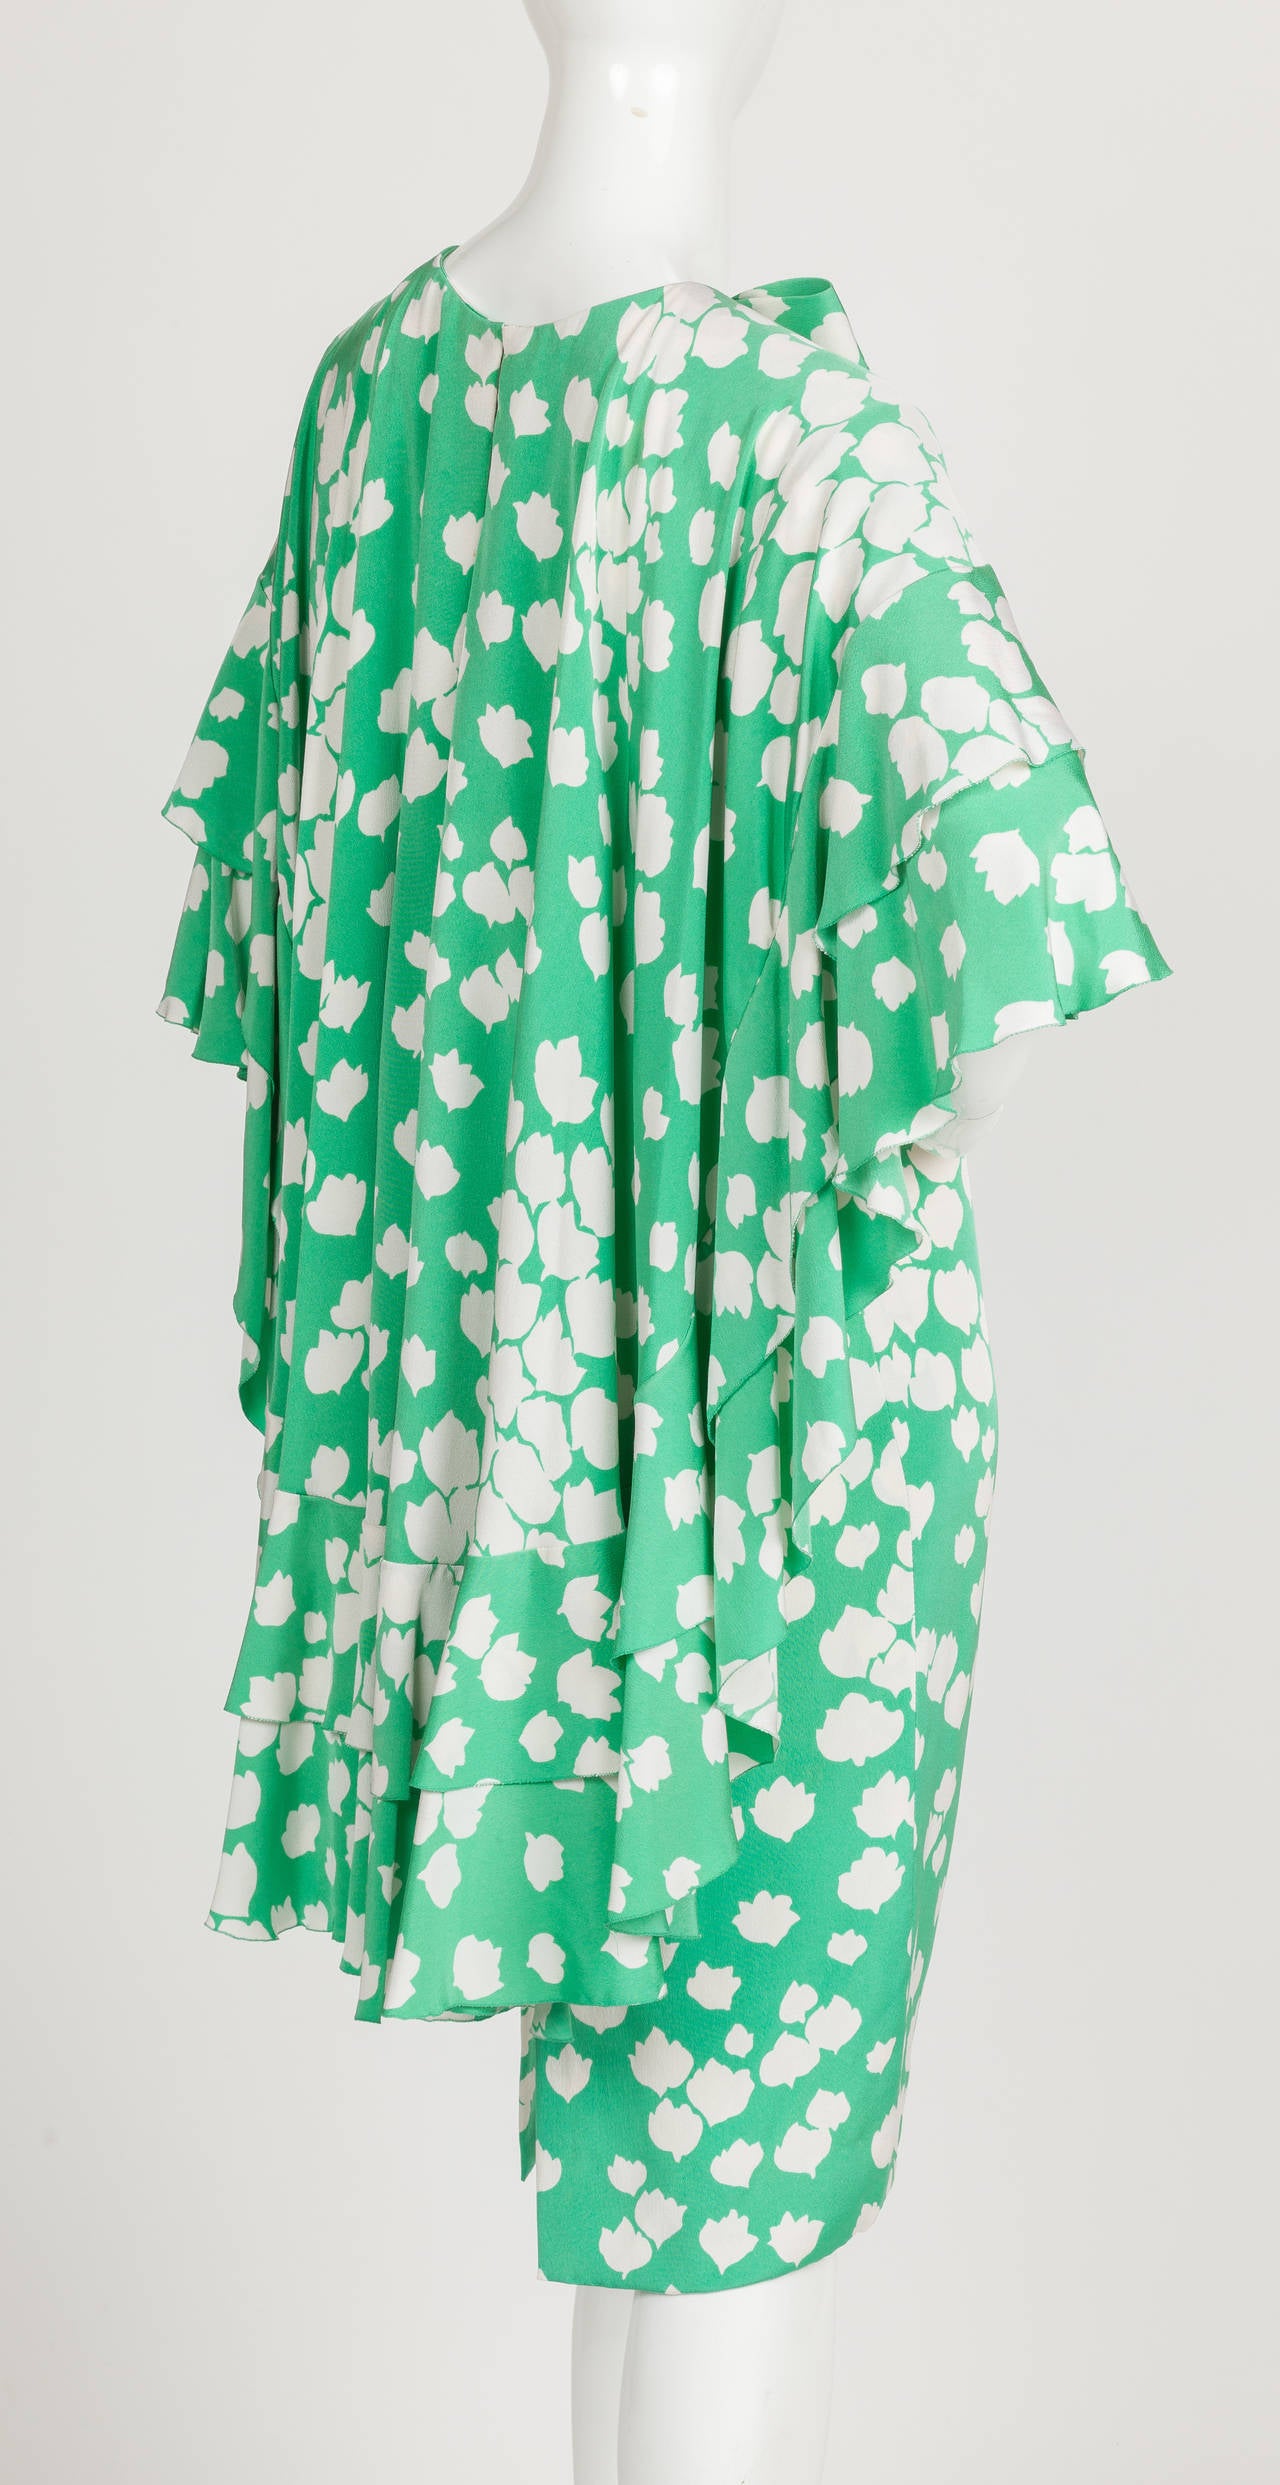 A Pierre Cardin attributed green and white silk tea length shift dress with abstract flower print. The standout element of this dress is the ruffled cape that attaches at the shoulders and cascades down the back and is completed by a decorative bow